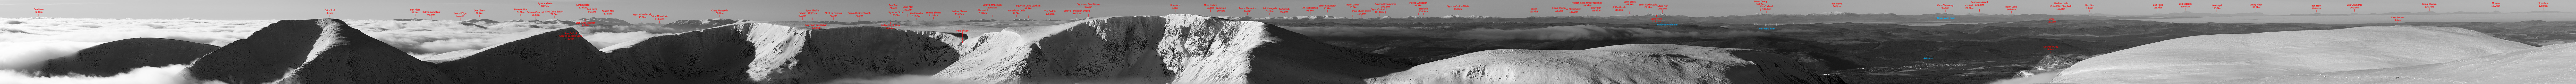 Labelled panoramic view from Ben MacDui 12 Dec 2009